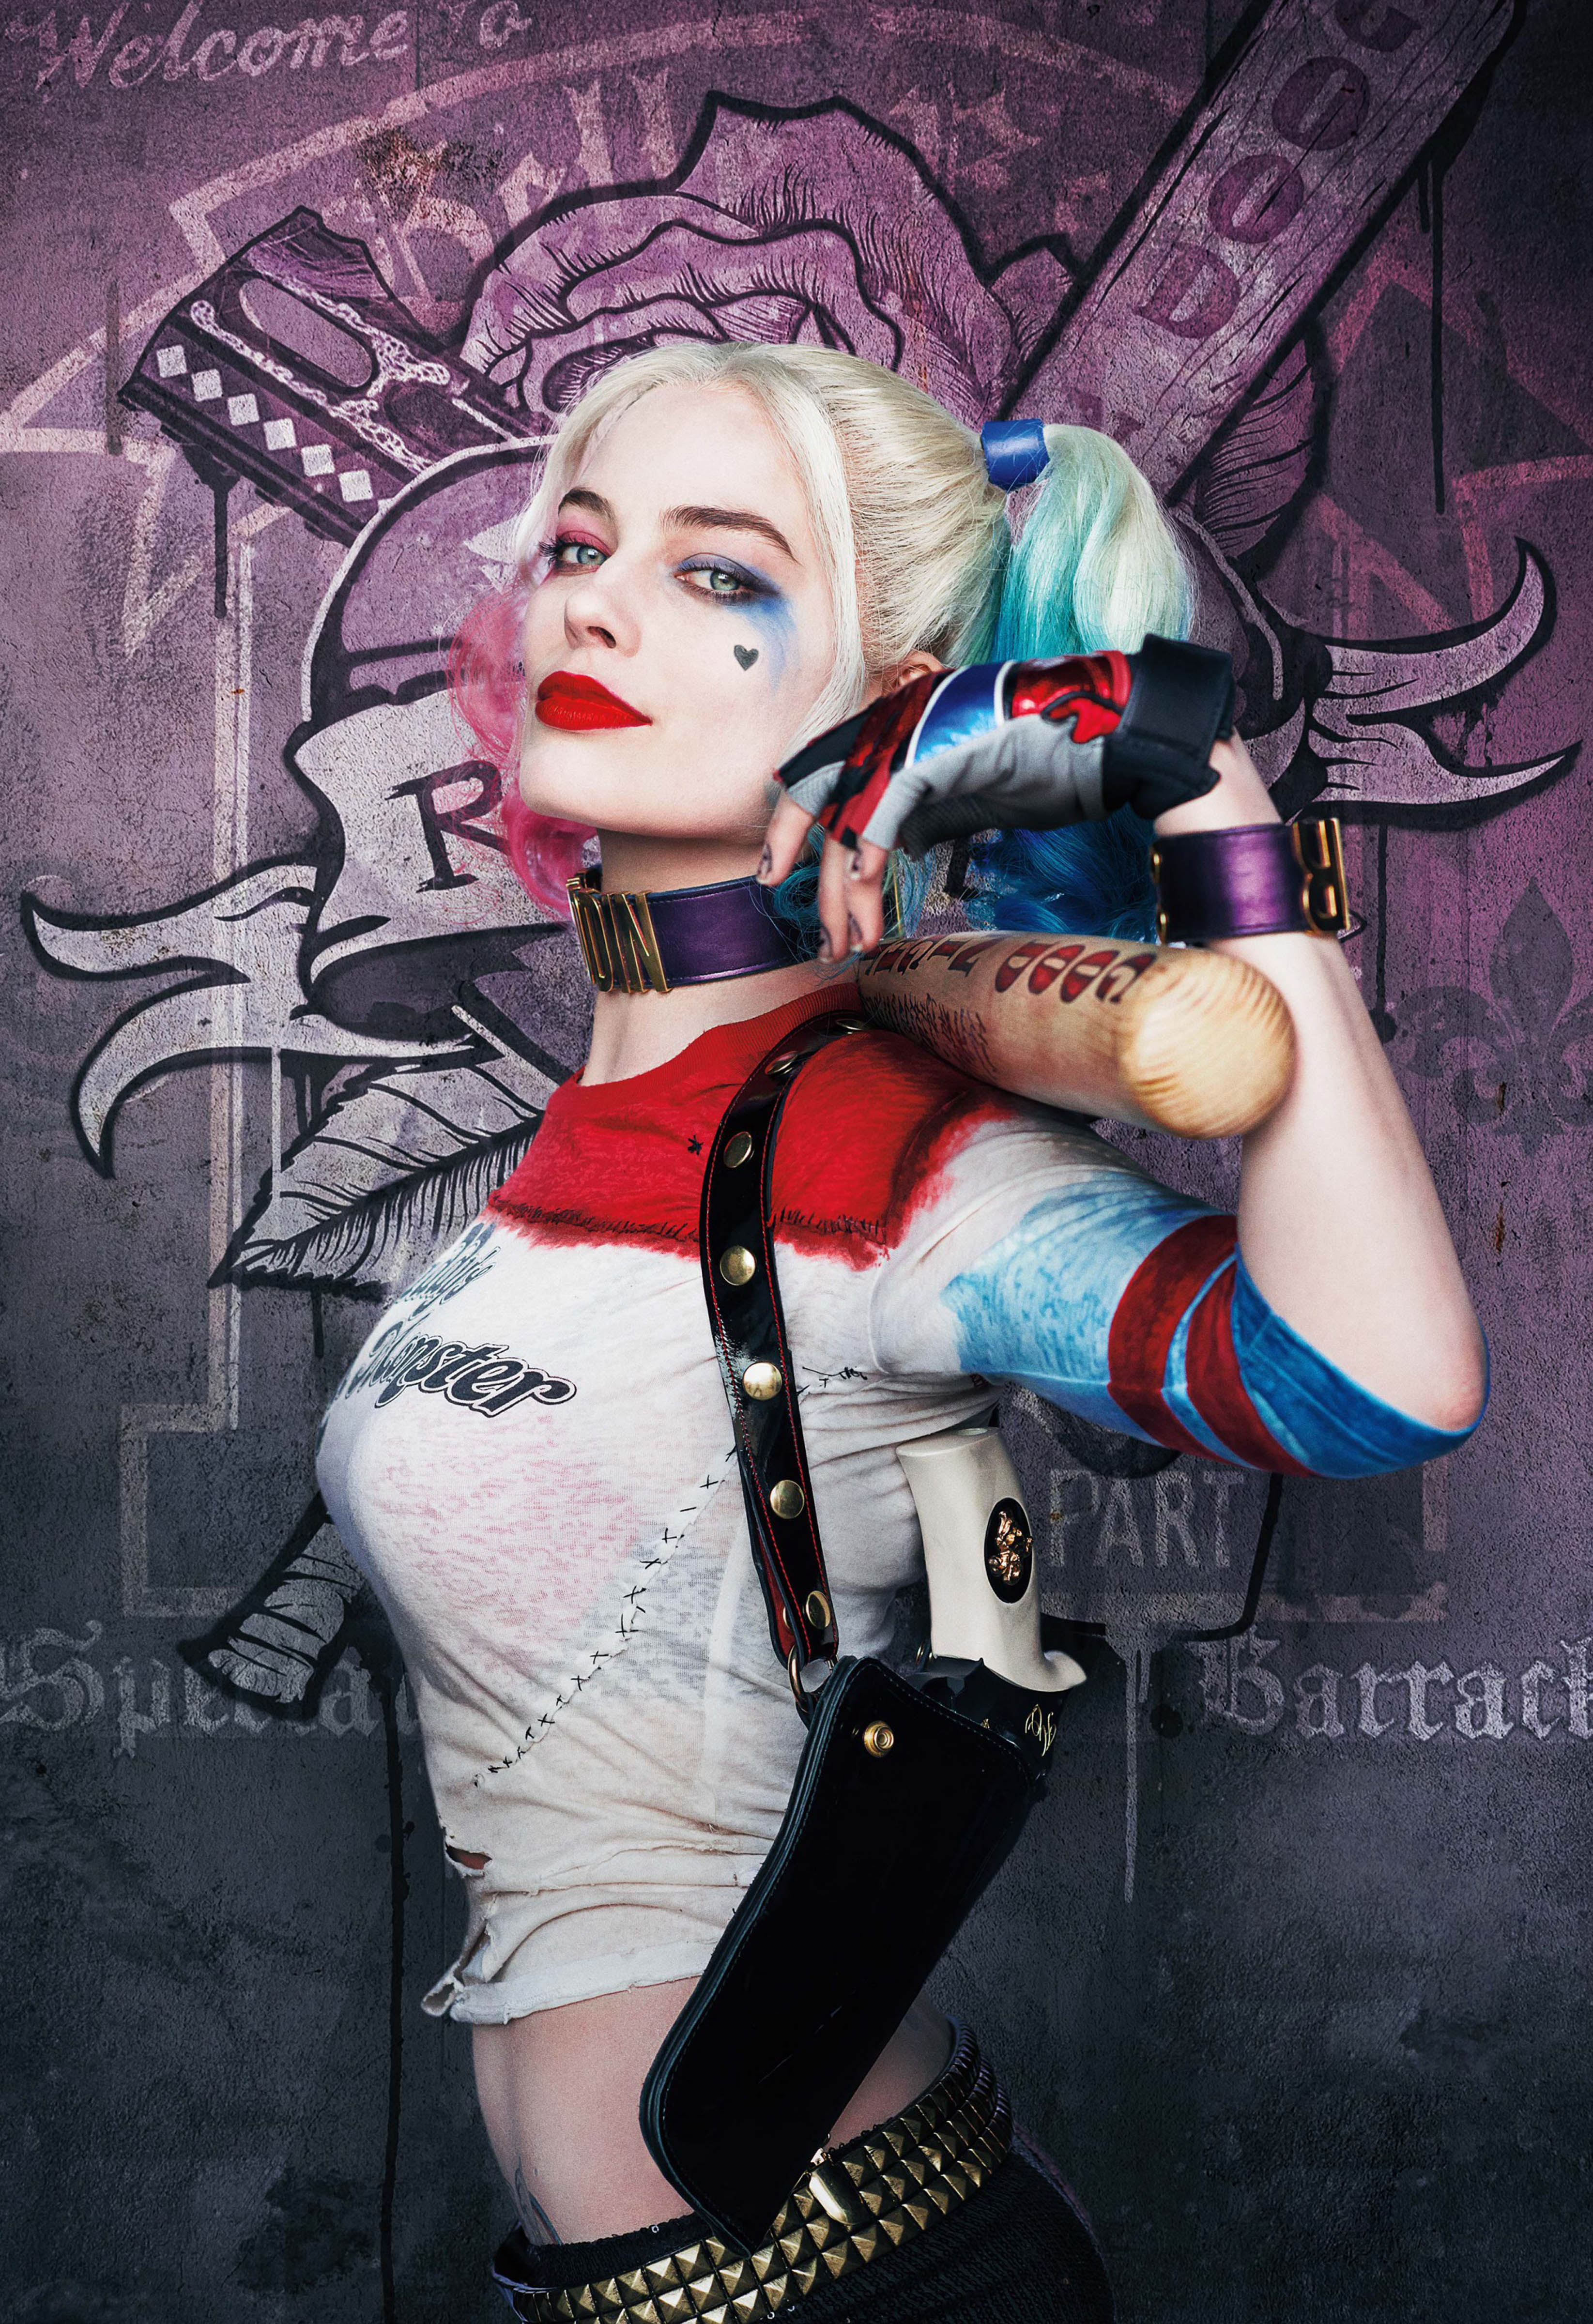 Best of Harley quinn sexy outfit